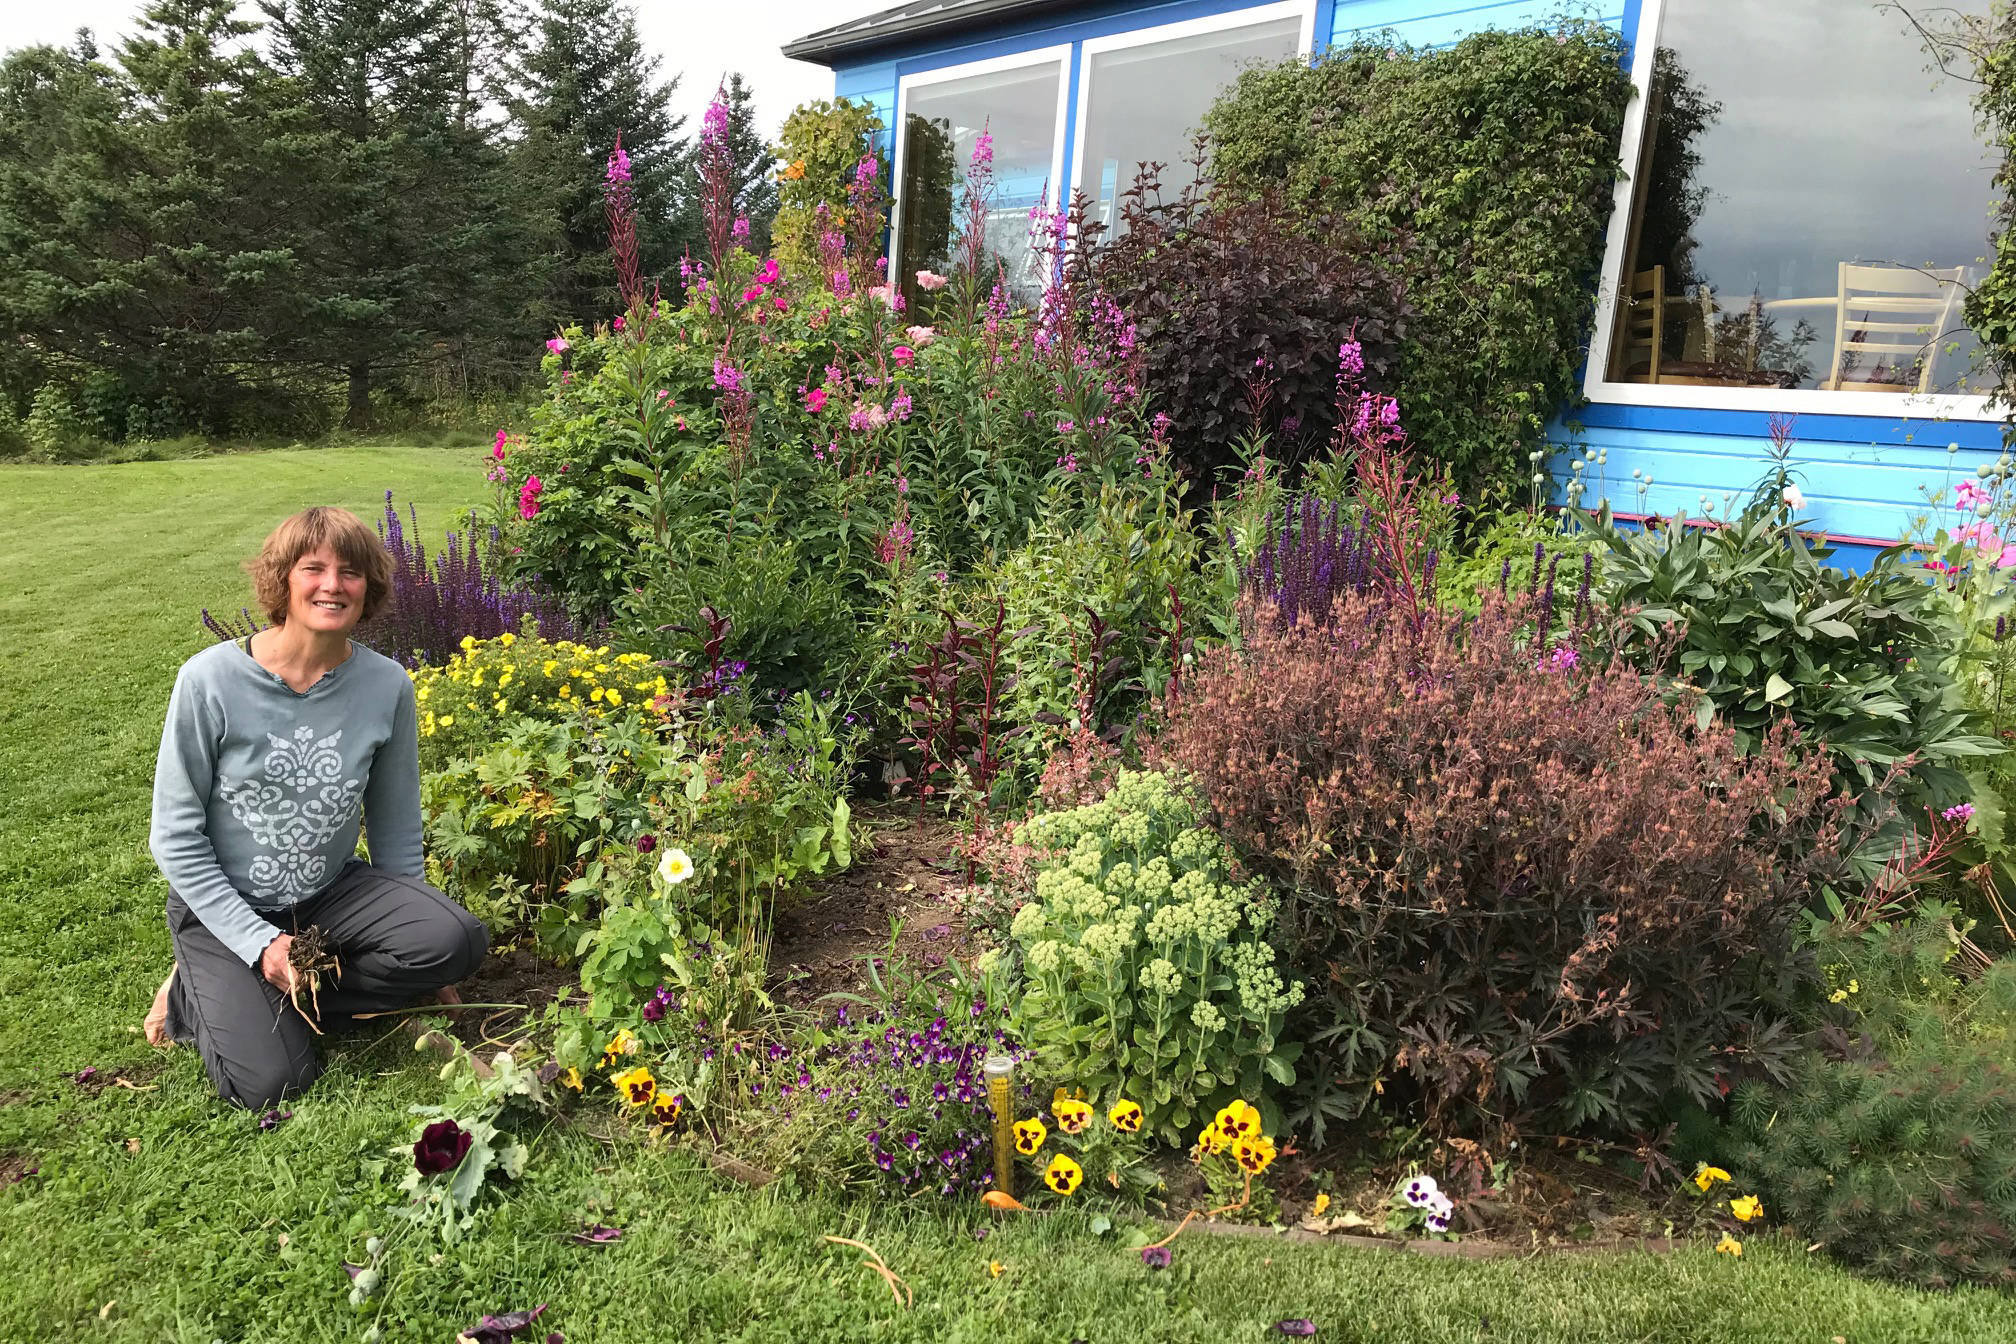 Jane Wiebe appreciating the part of her freshened up garden that she views from the kitchen window on Aug. 10, 2018, in Homer, Alaska. (Photo by Rosemary Fitzpatrick)